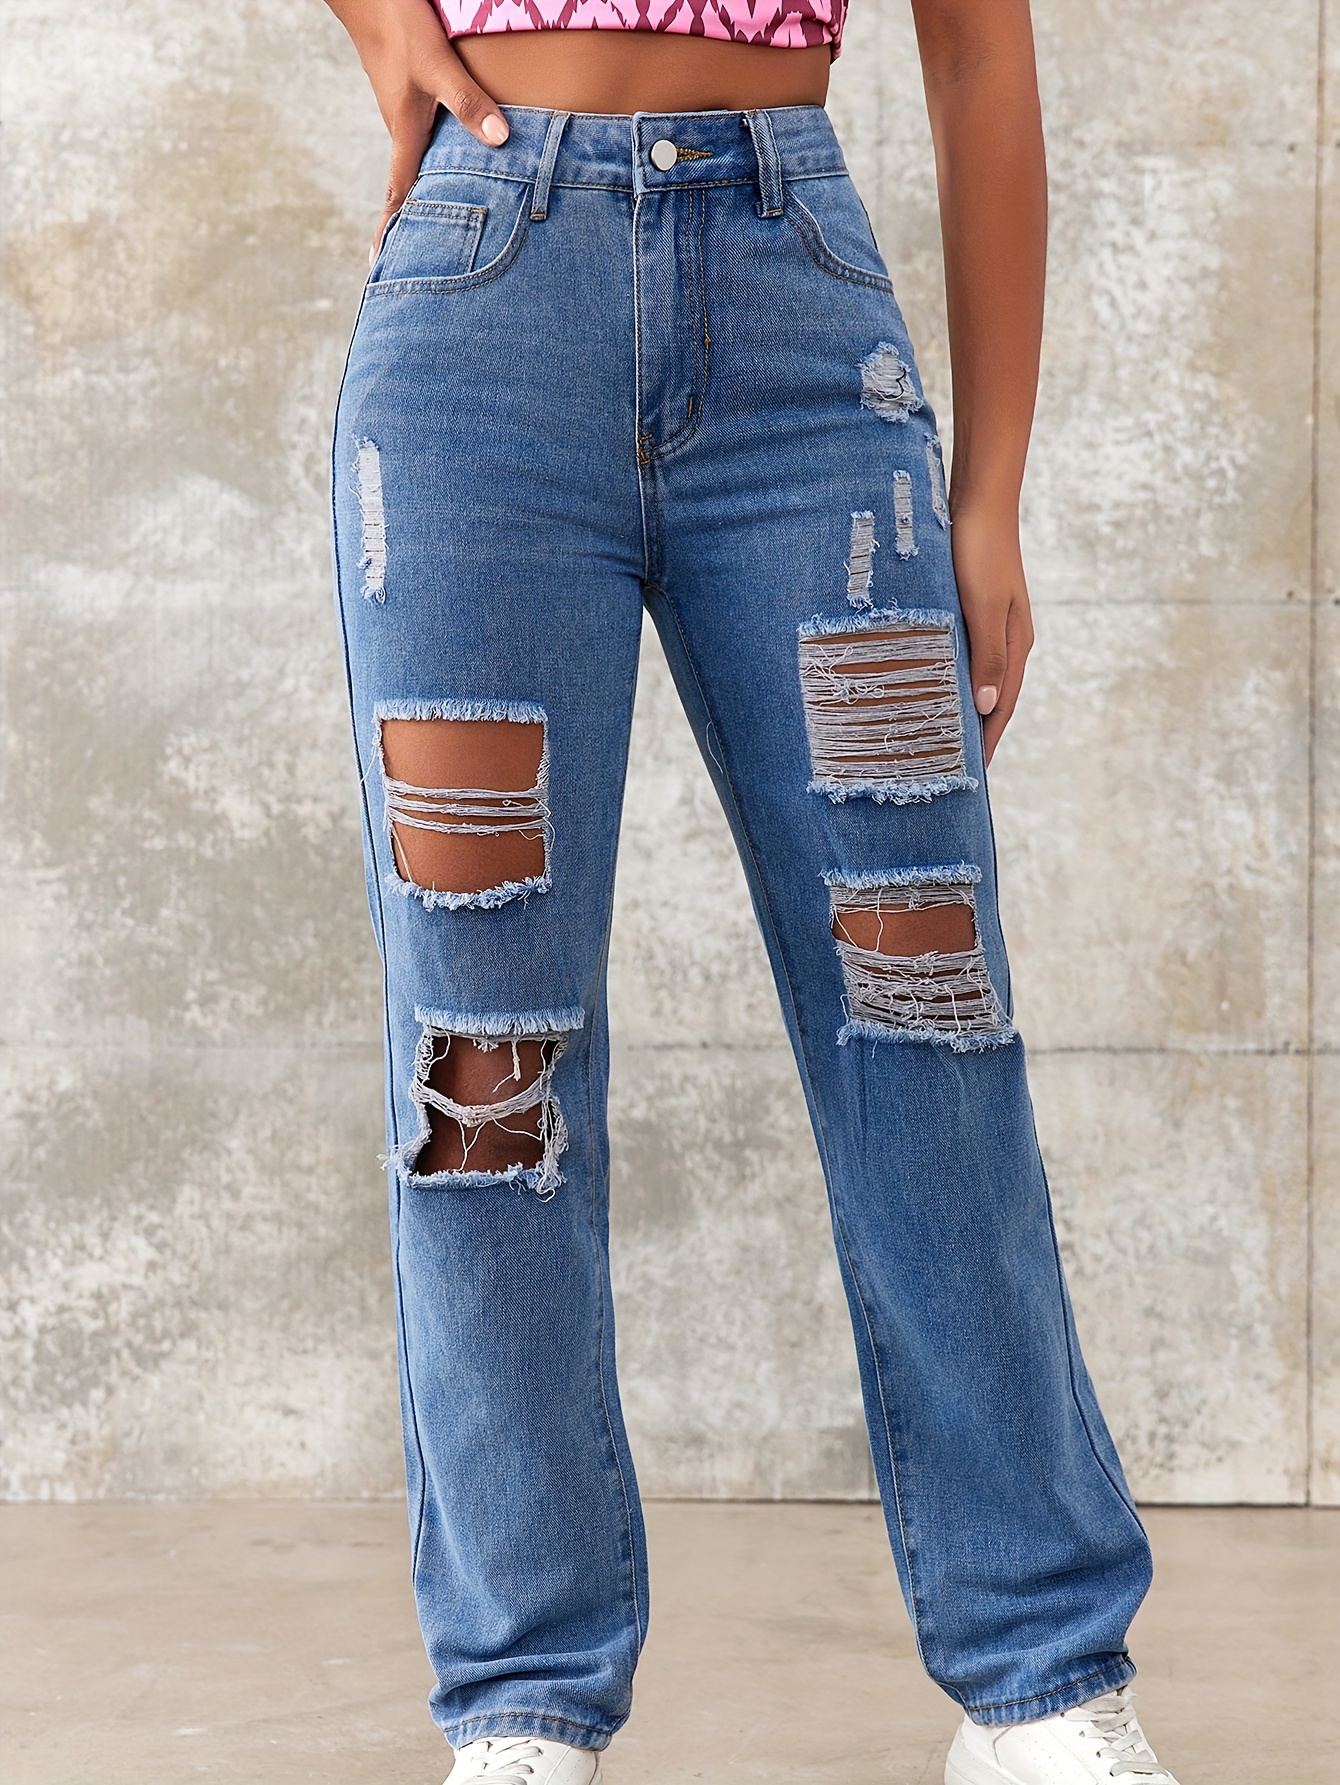 Plus Size Retro High Waisted Ripped Jeans, Women Solid Color Casual Denim  Jeans